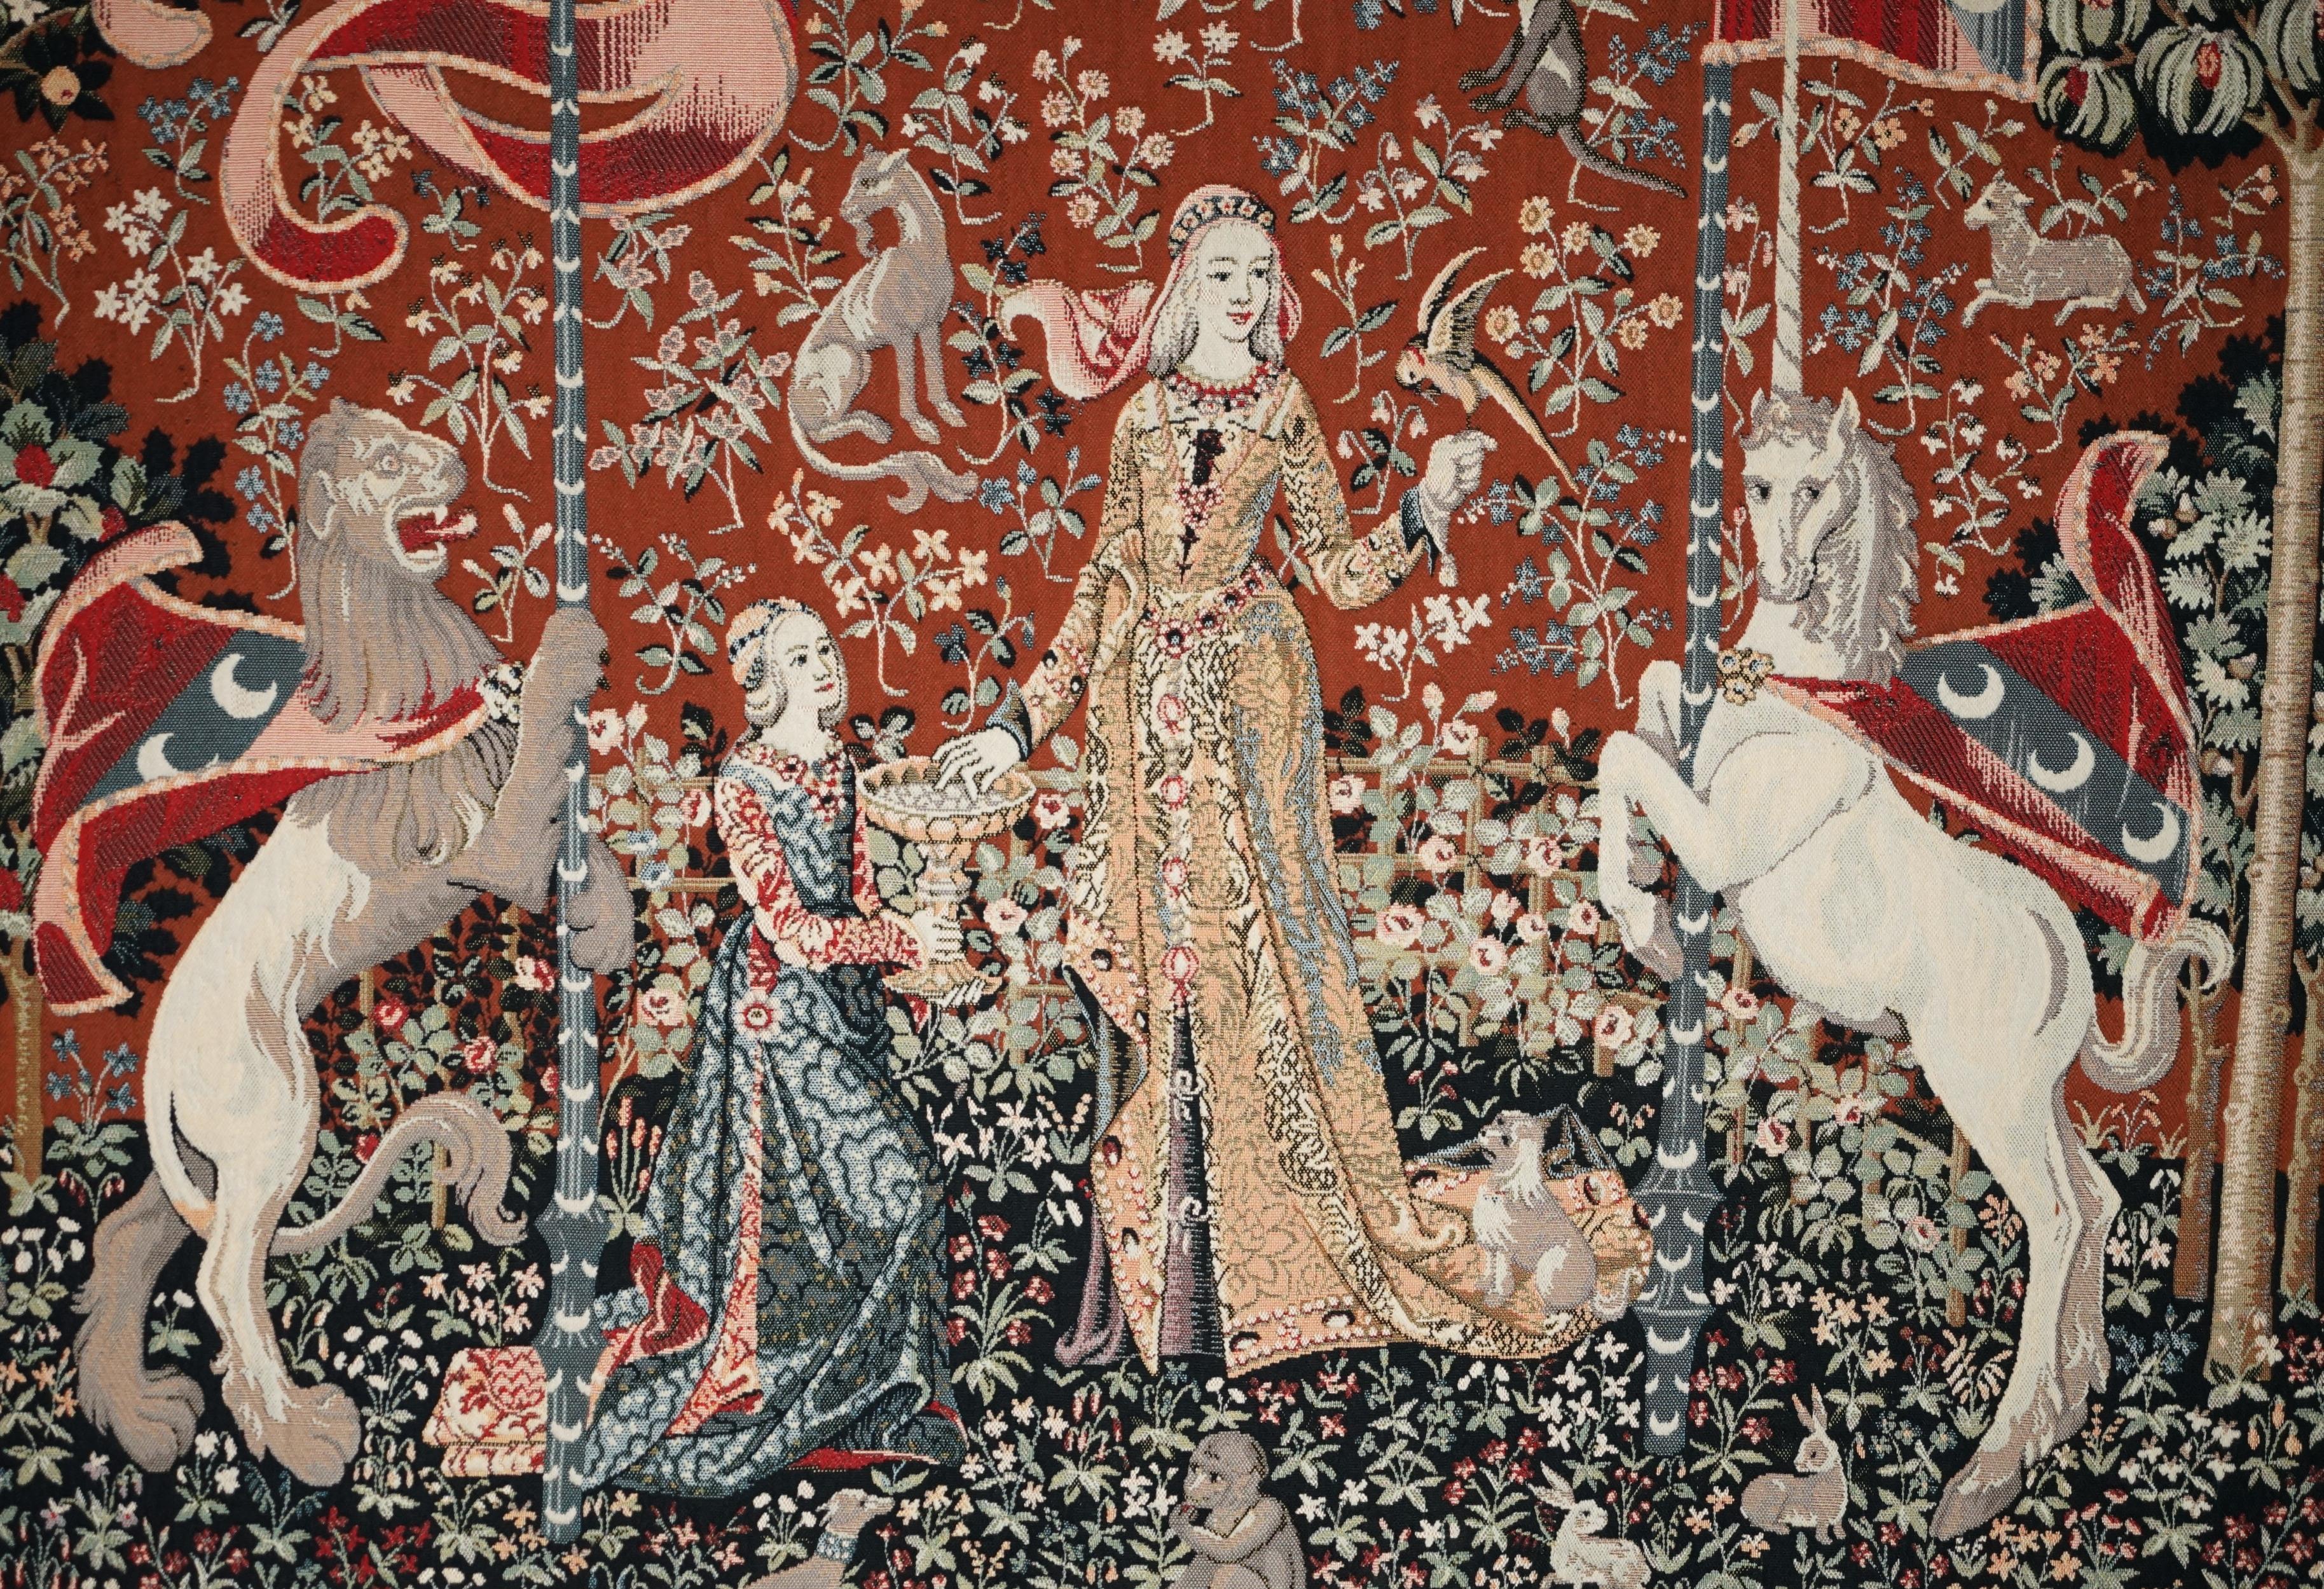 ViNTAGE THE LADY AND THE UNICORN LARGE WALL HANGING WOVEN TAPEStry 216CM X 189CM (Edwardian)